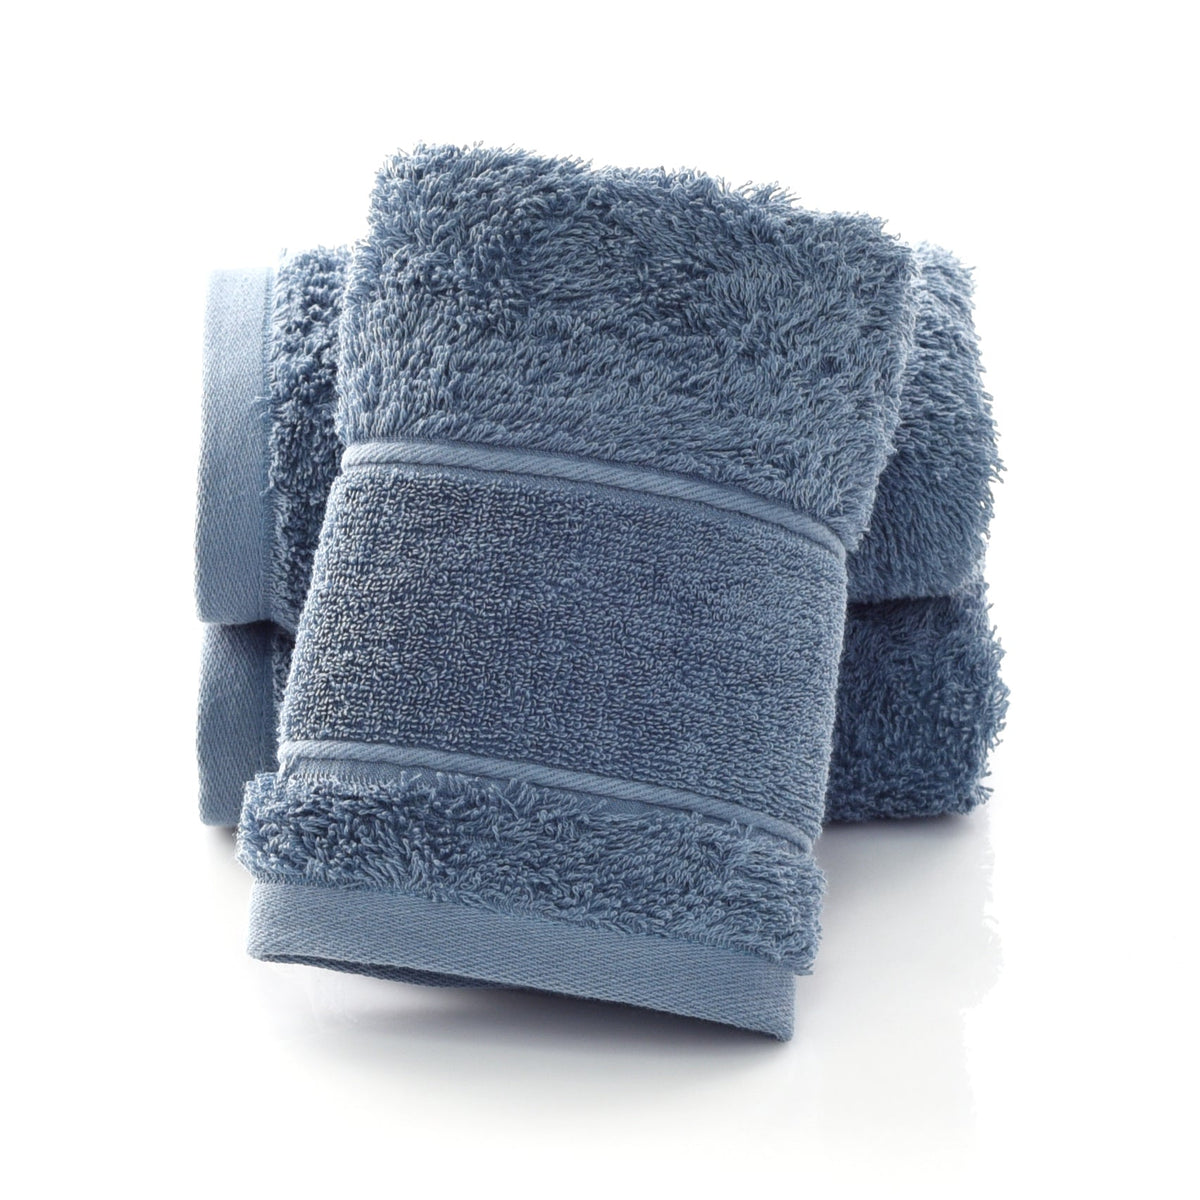 Eco Oasis Solid Organic Cotton Bath Towel | Hypoallergenic - Allergy Friendly - Naturally Free